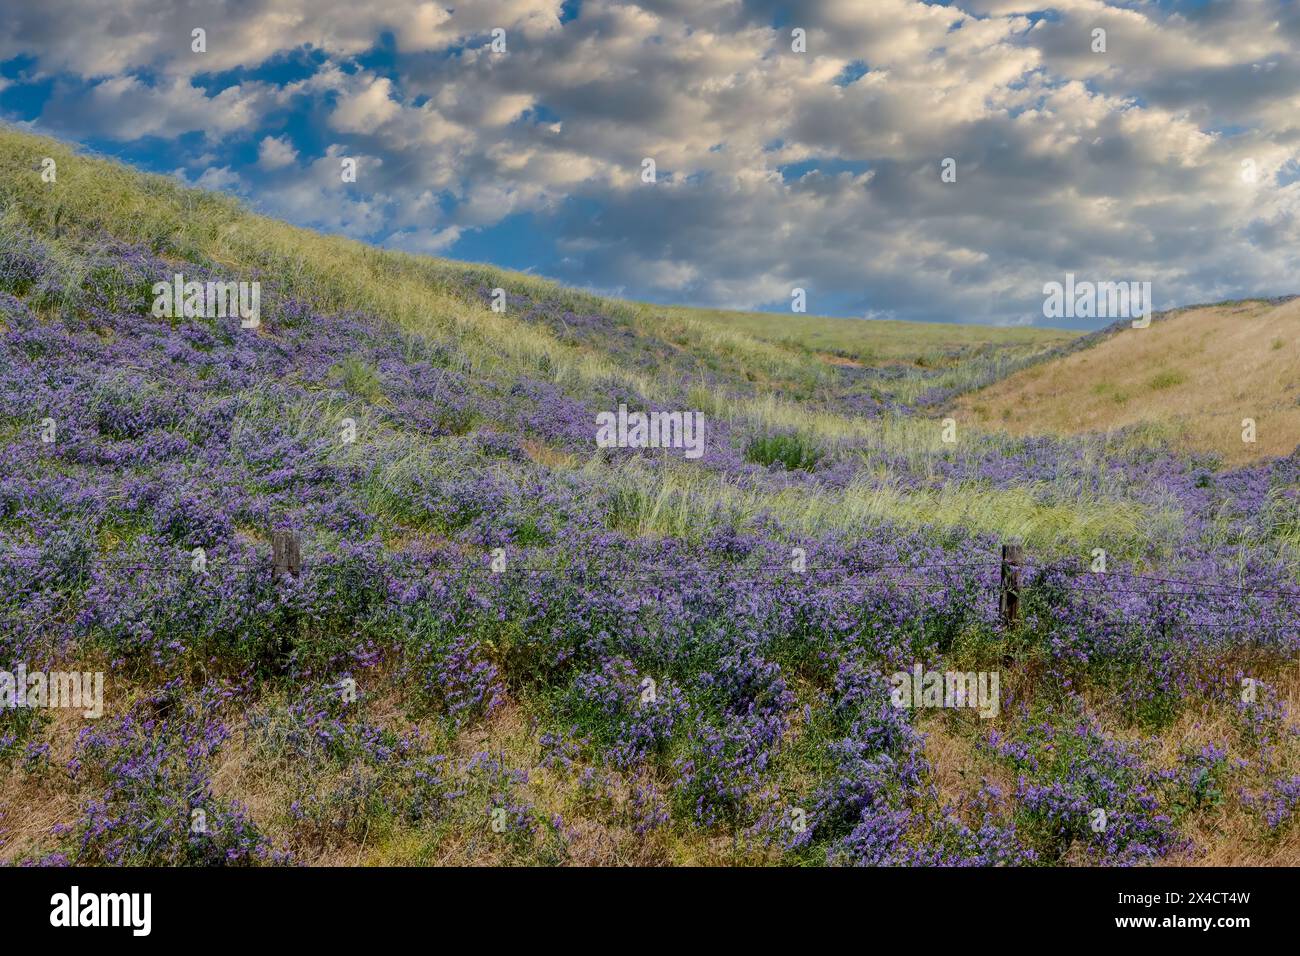 USA, Washington State, Palouse. Benge with rolling hills covered with flowering vetch. Stock Photo